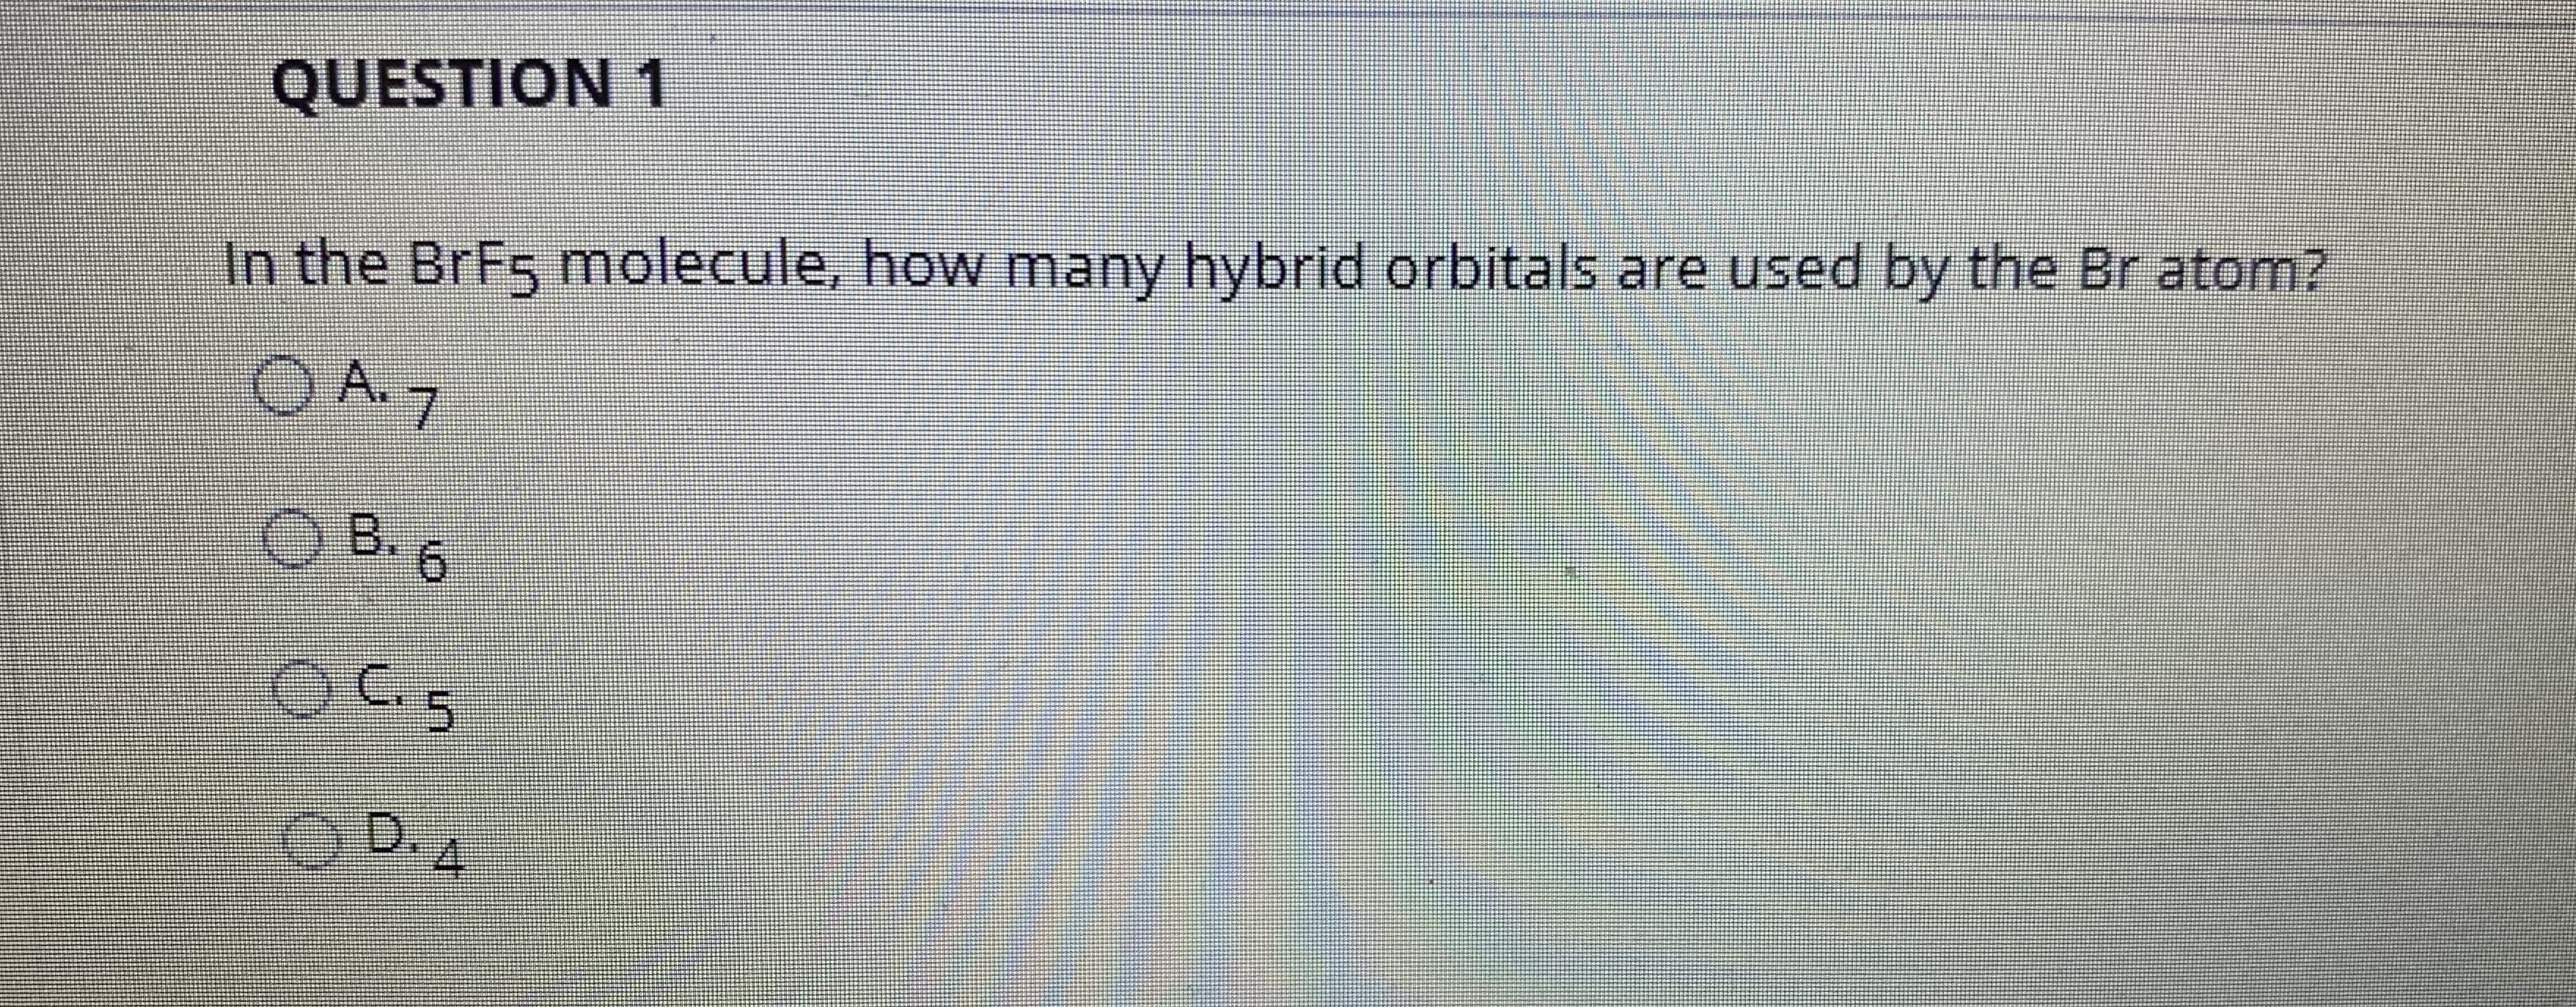 In the BRF5 molecule, how many hybrid orbitals are used by the Br atom?
